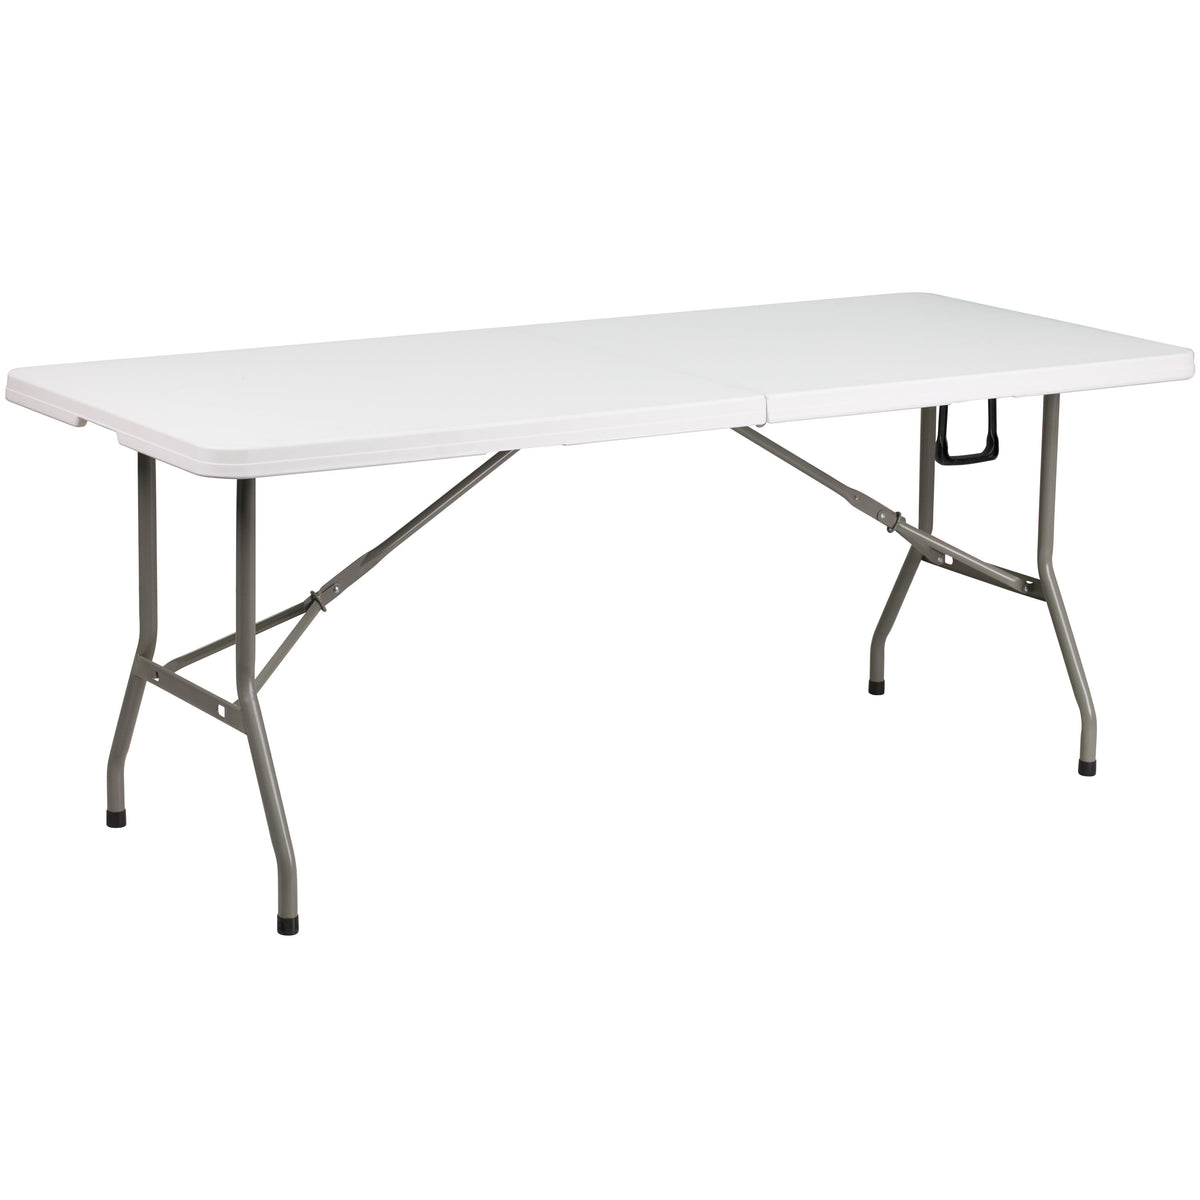 White |#| 8' x 8' White Pop Up Canopy, Folding Table and 4 White Folding Chairs Bundle